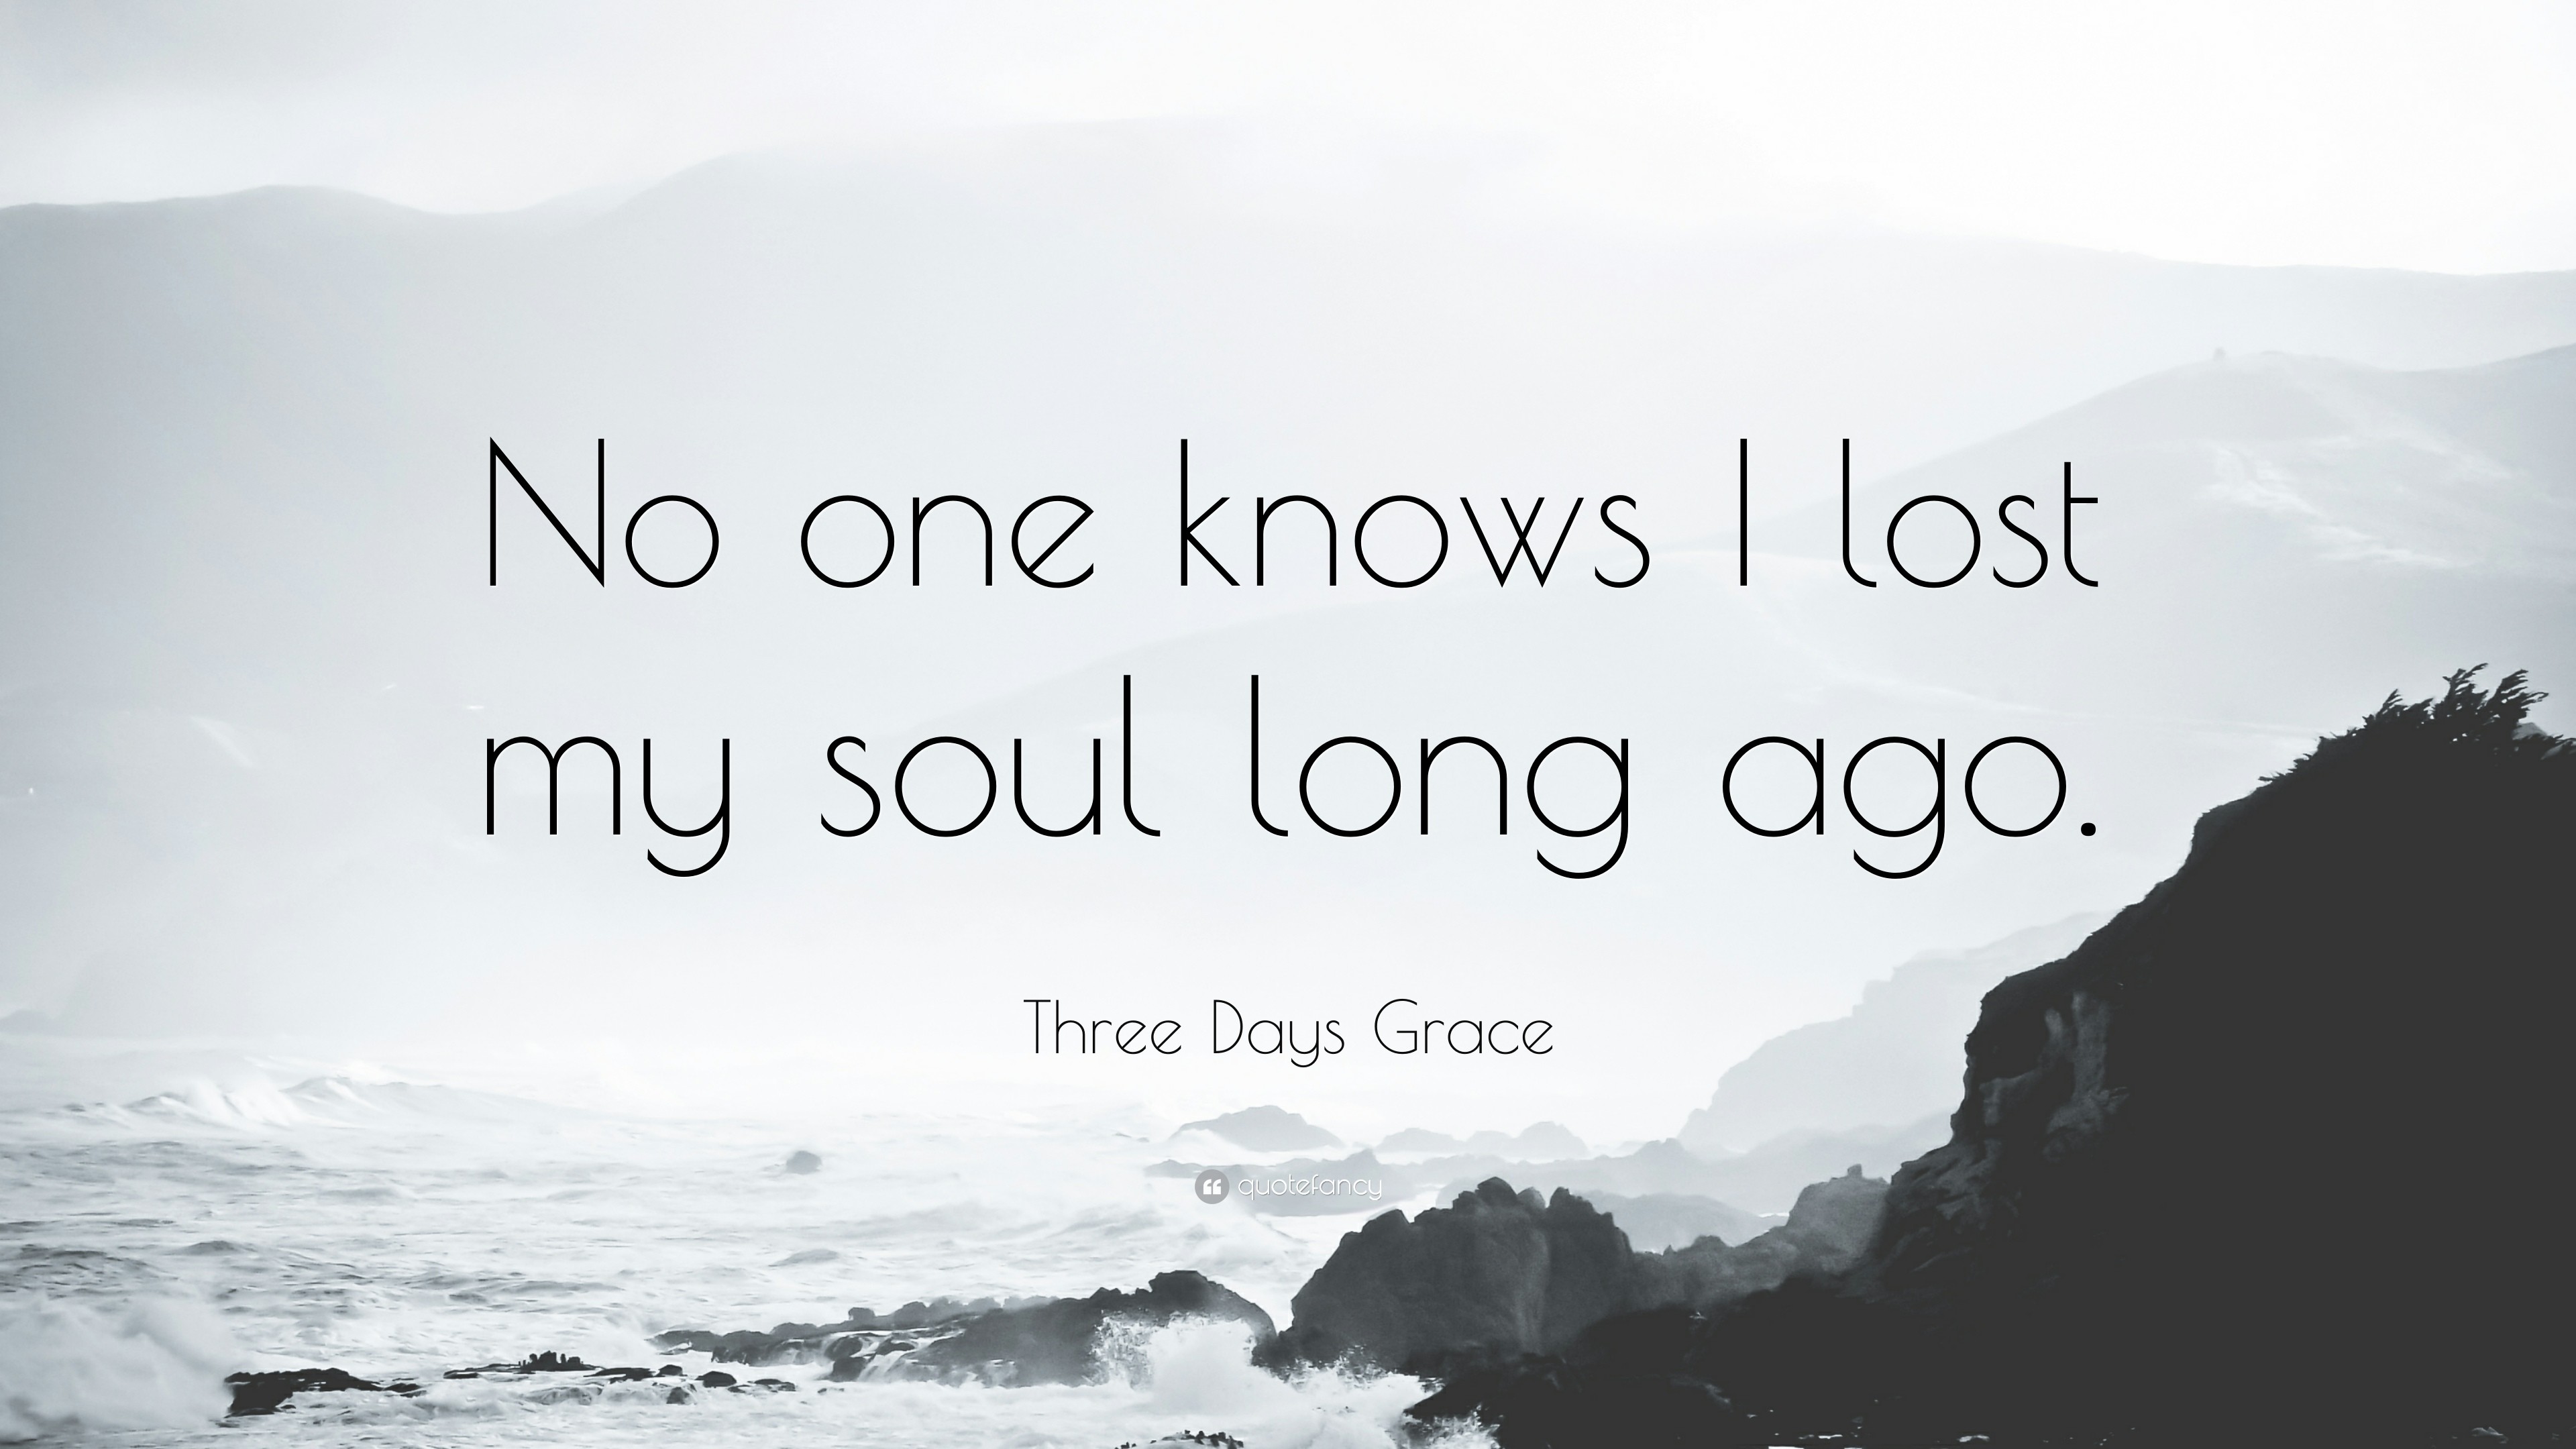 3840x2160 Three Days Grace Quote: “No one knows I lost my soul long ago.